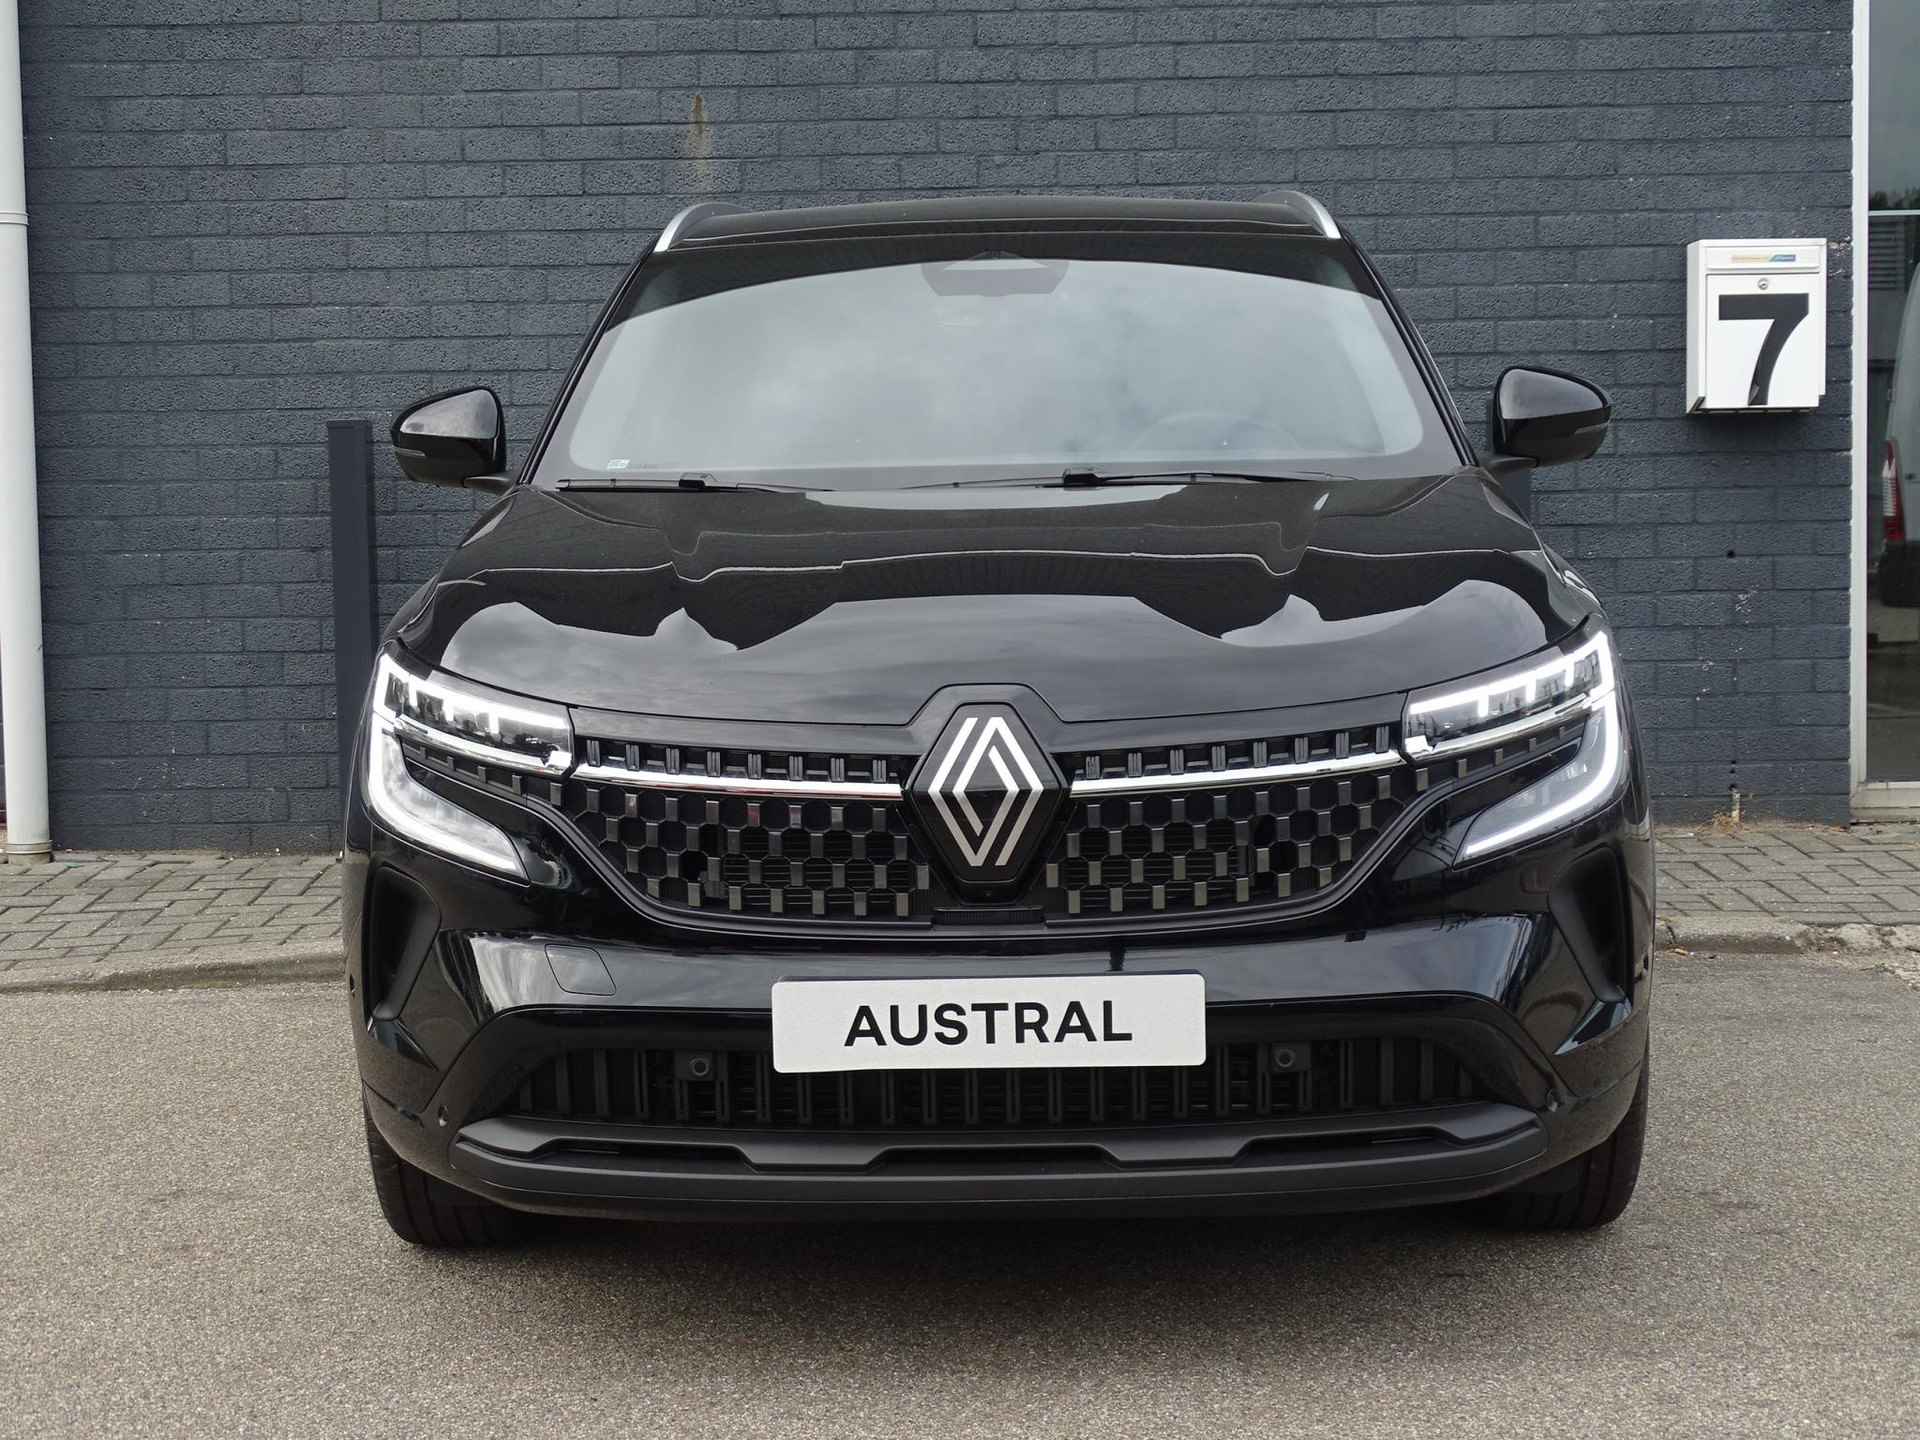 Renault Austral 1.2 Mild Hybrid 130 Techno PACK LOOK / PACK AROUND VIEW CAMERA / PACK COMFORT / PACK SAFETY - 11/24